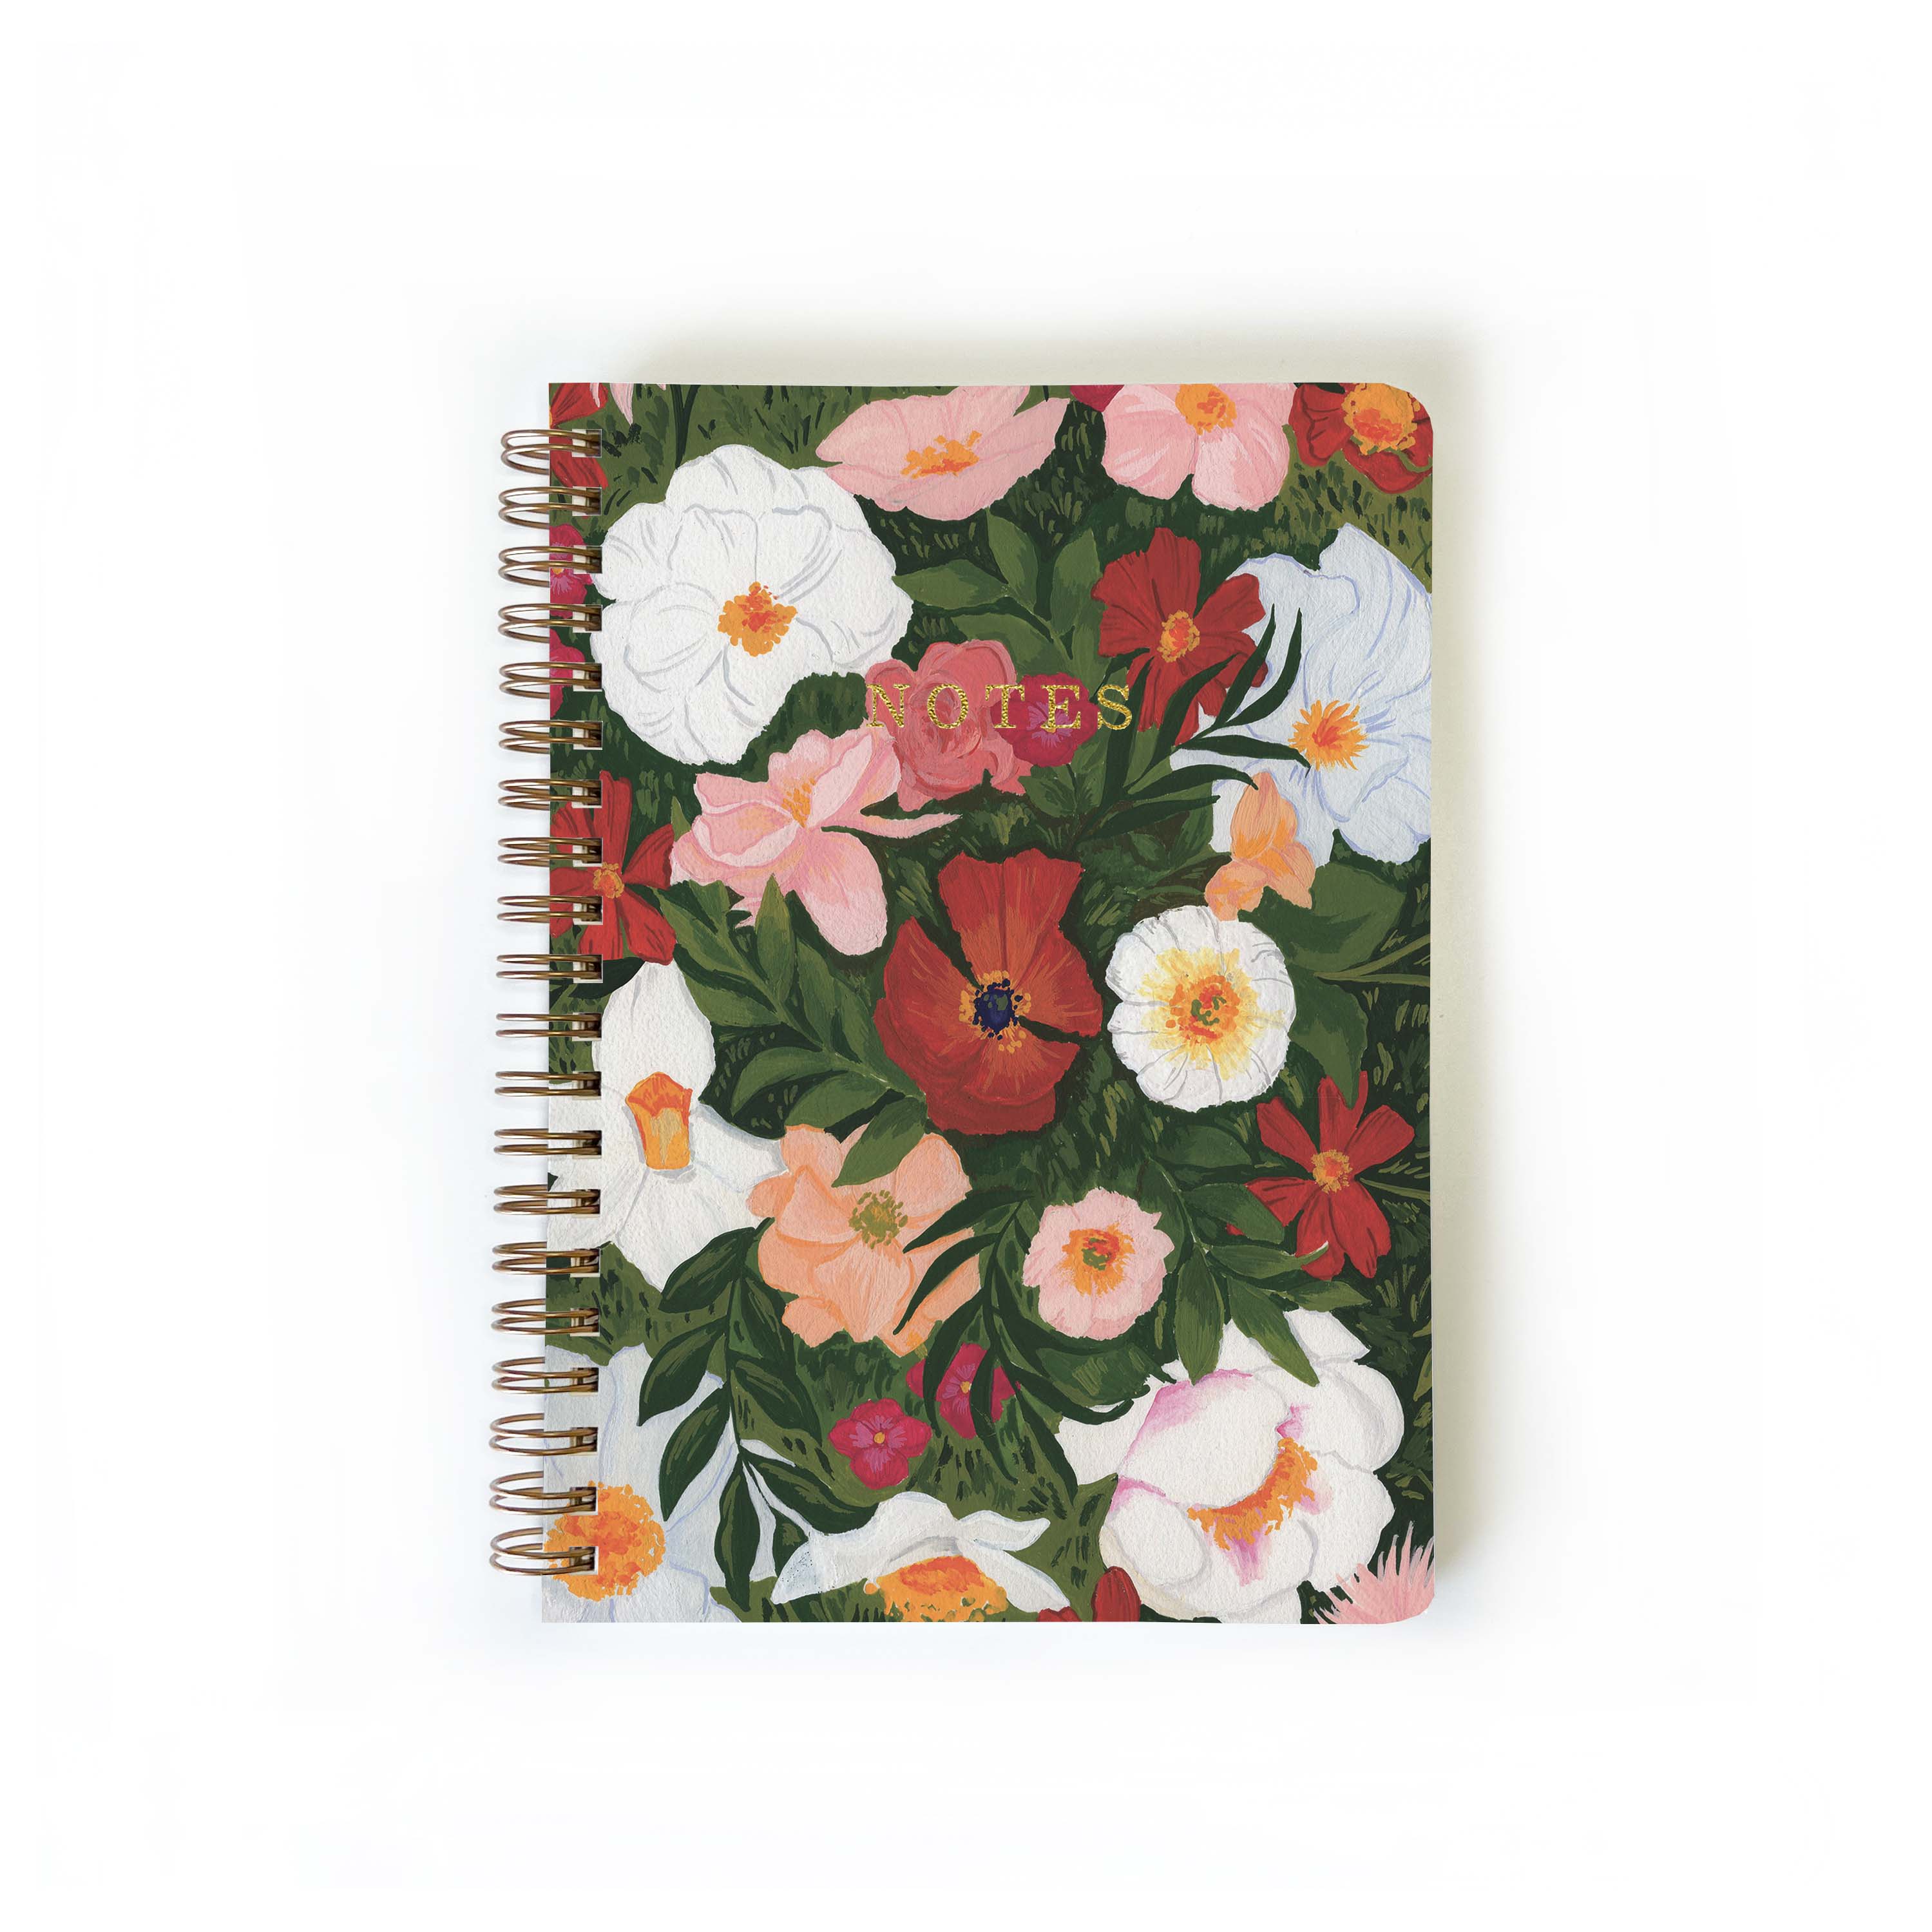 Lush Garden Notebook Journal: Small Notebook / Blank Pages